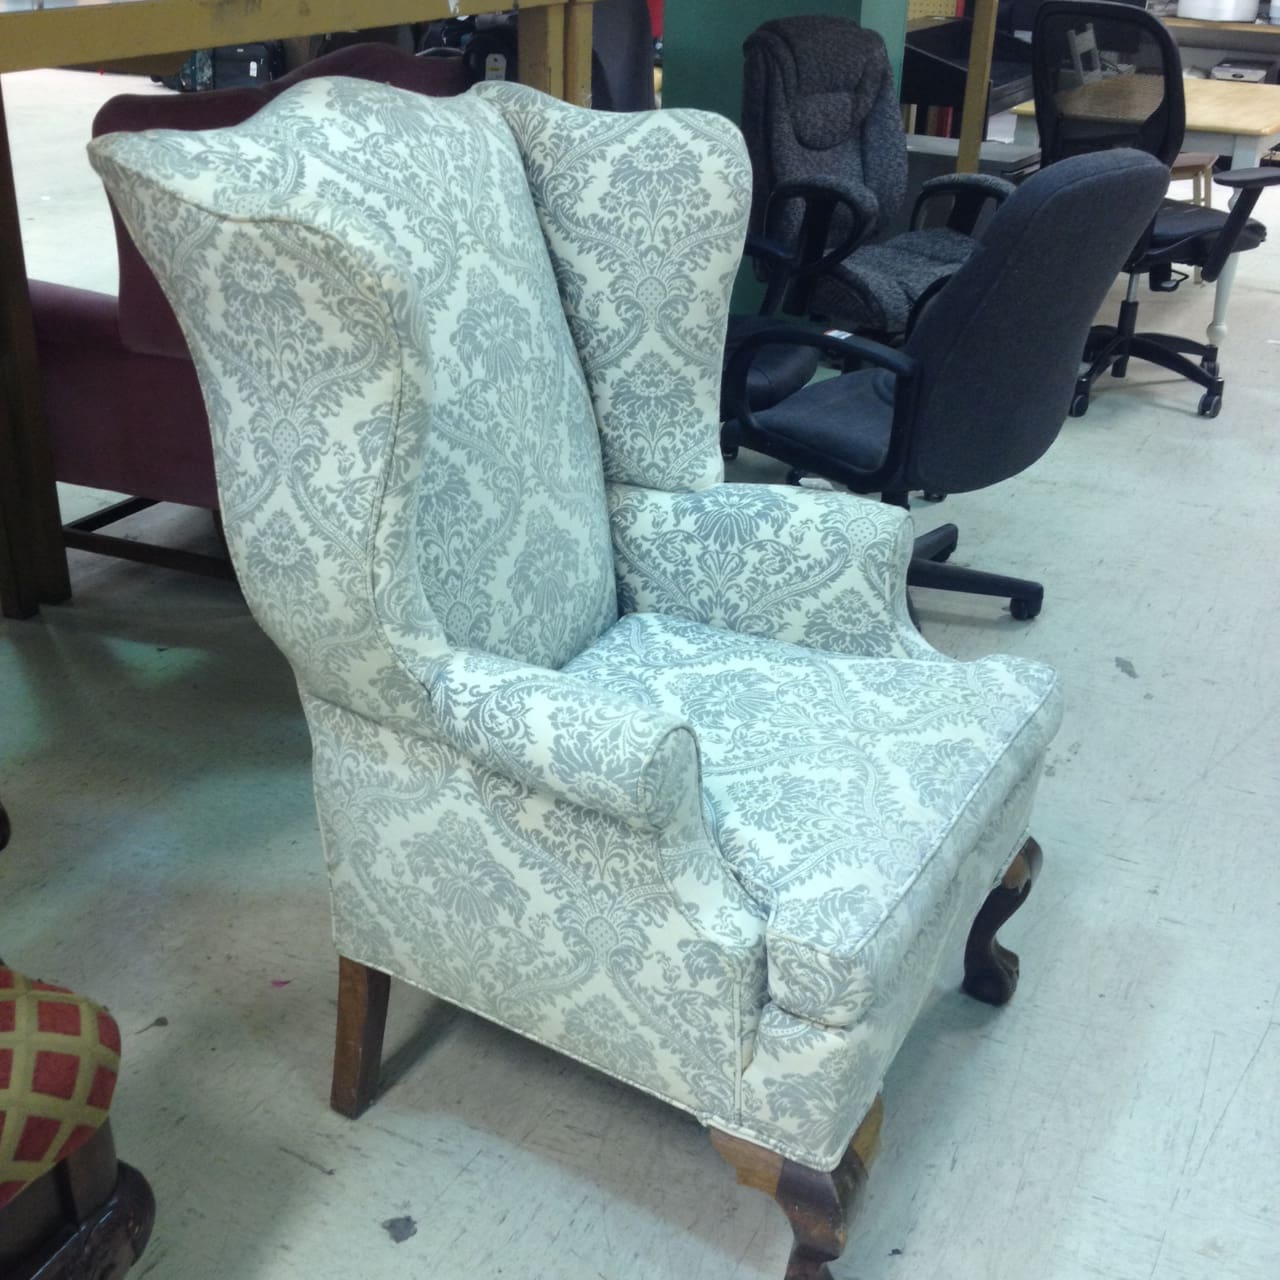 How To Reupholster A Wingback Chair, Is It Hard To Reupholster A Wingback Chair